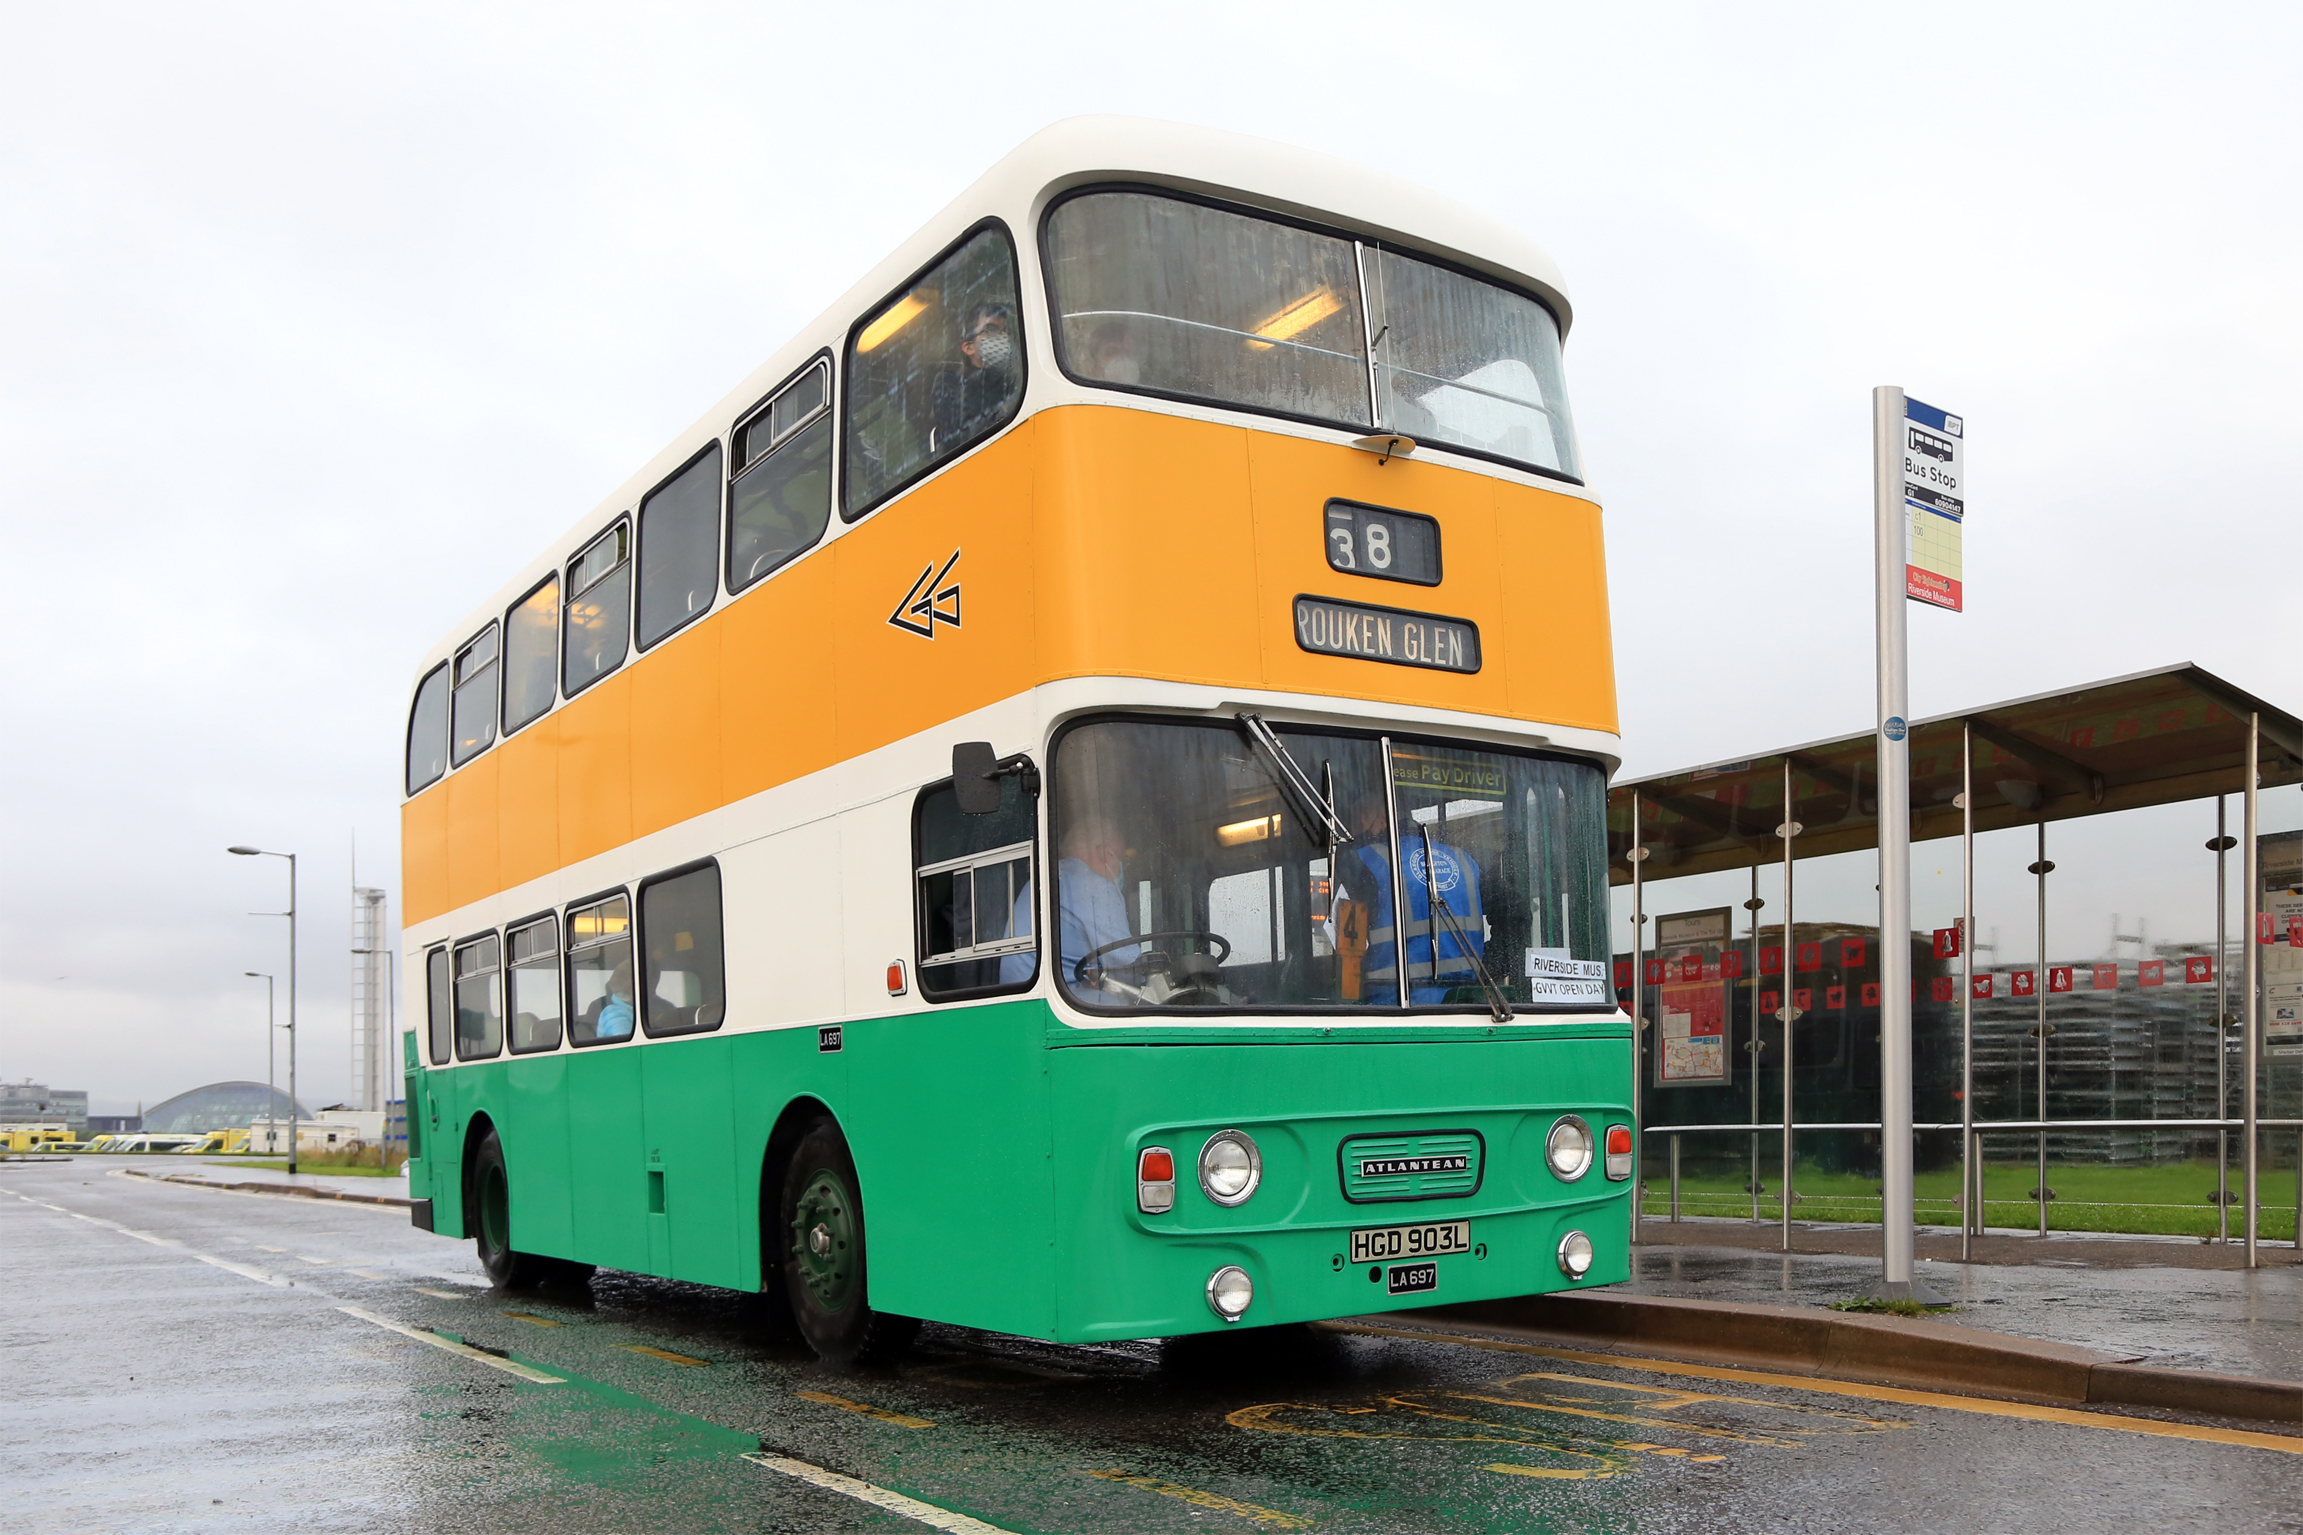 Since 2018, much conservation work has been under undertaken on Kevin Carroll’s 1973 Greater Glasgow PTE Leyland Atlantean, returning it to original condition as far as possible. It was a regular performer on the shuttle to Glasgow’s Riverside museum, seen here in the city centre and at Riverside